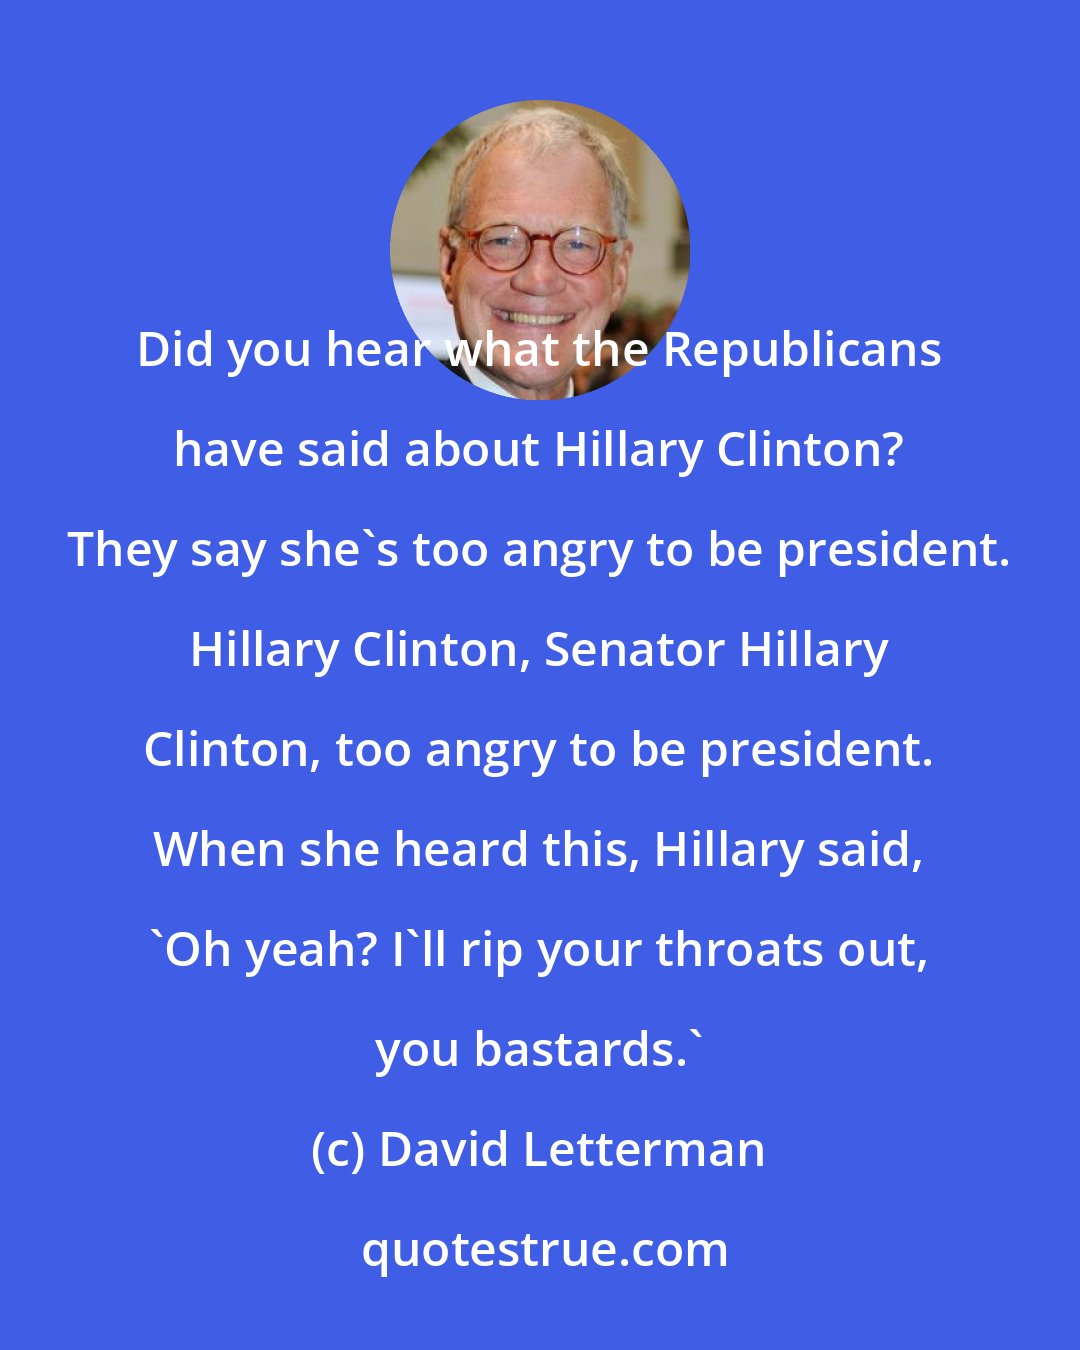 David Letterman: Did you hear what the Republicans have said about Hillary Clinton? They say she's too angry to be president. Hillary Clinton, Senator Hillary Clinton, too angry to be president. When she heard this, Hillary said, 'Oh yeah? I'll rip your throats out, you bastards.'